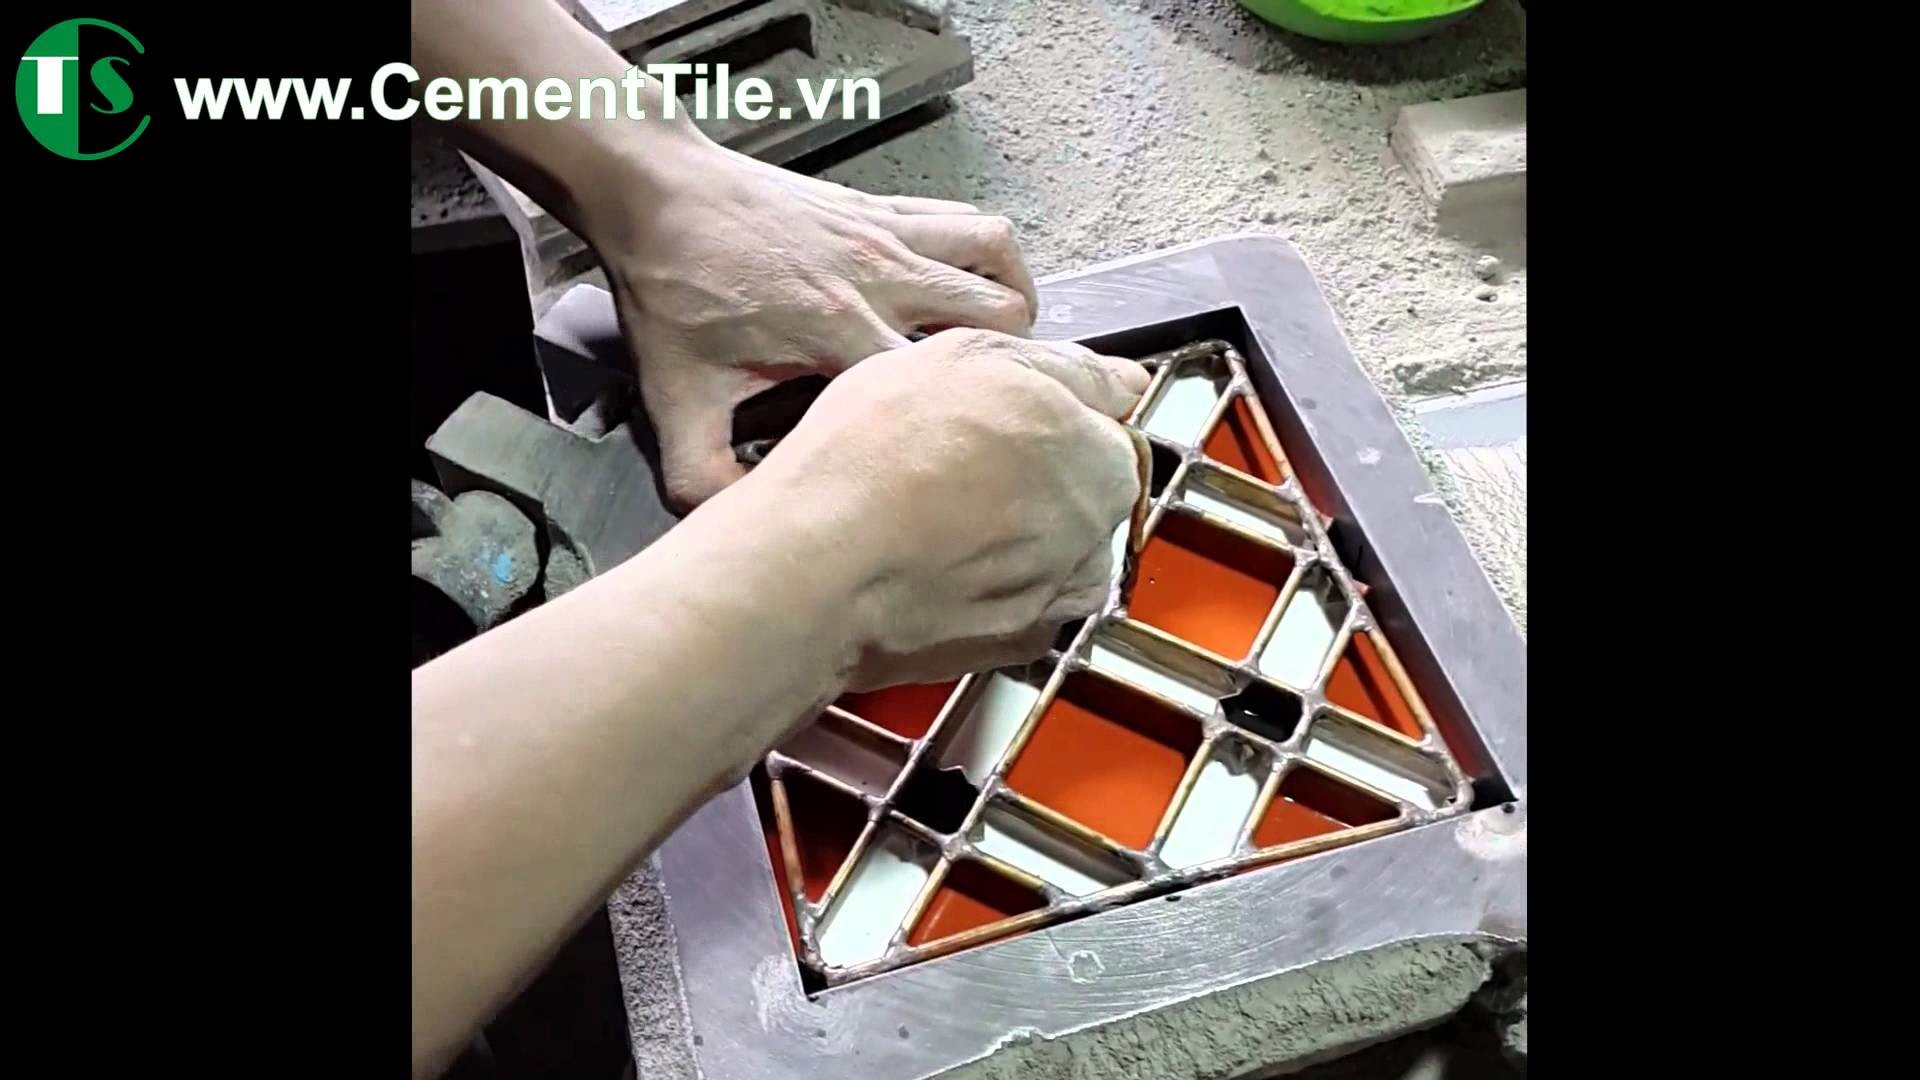 How to made encaustic cement tiles ?